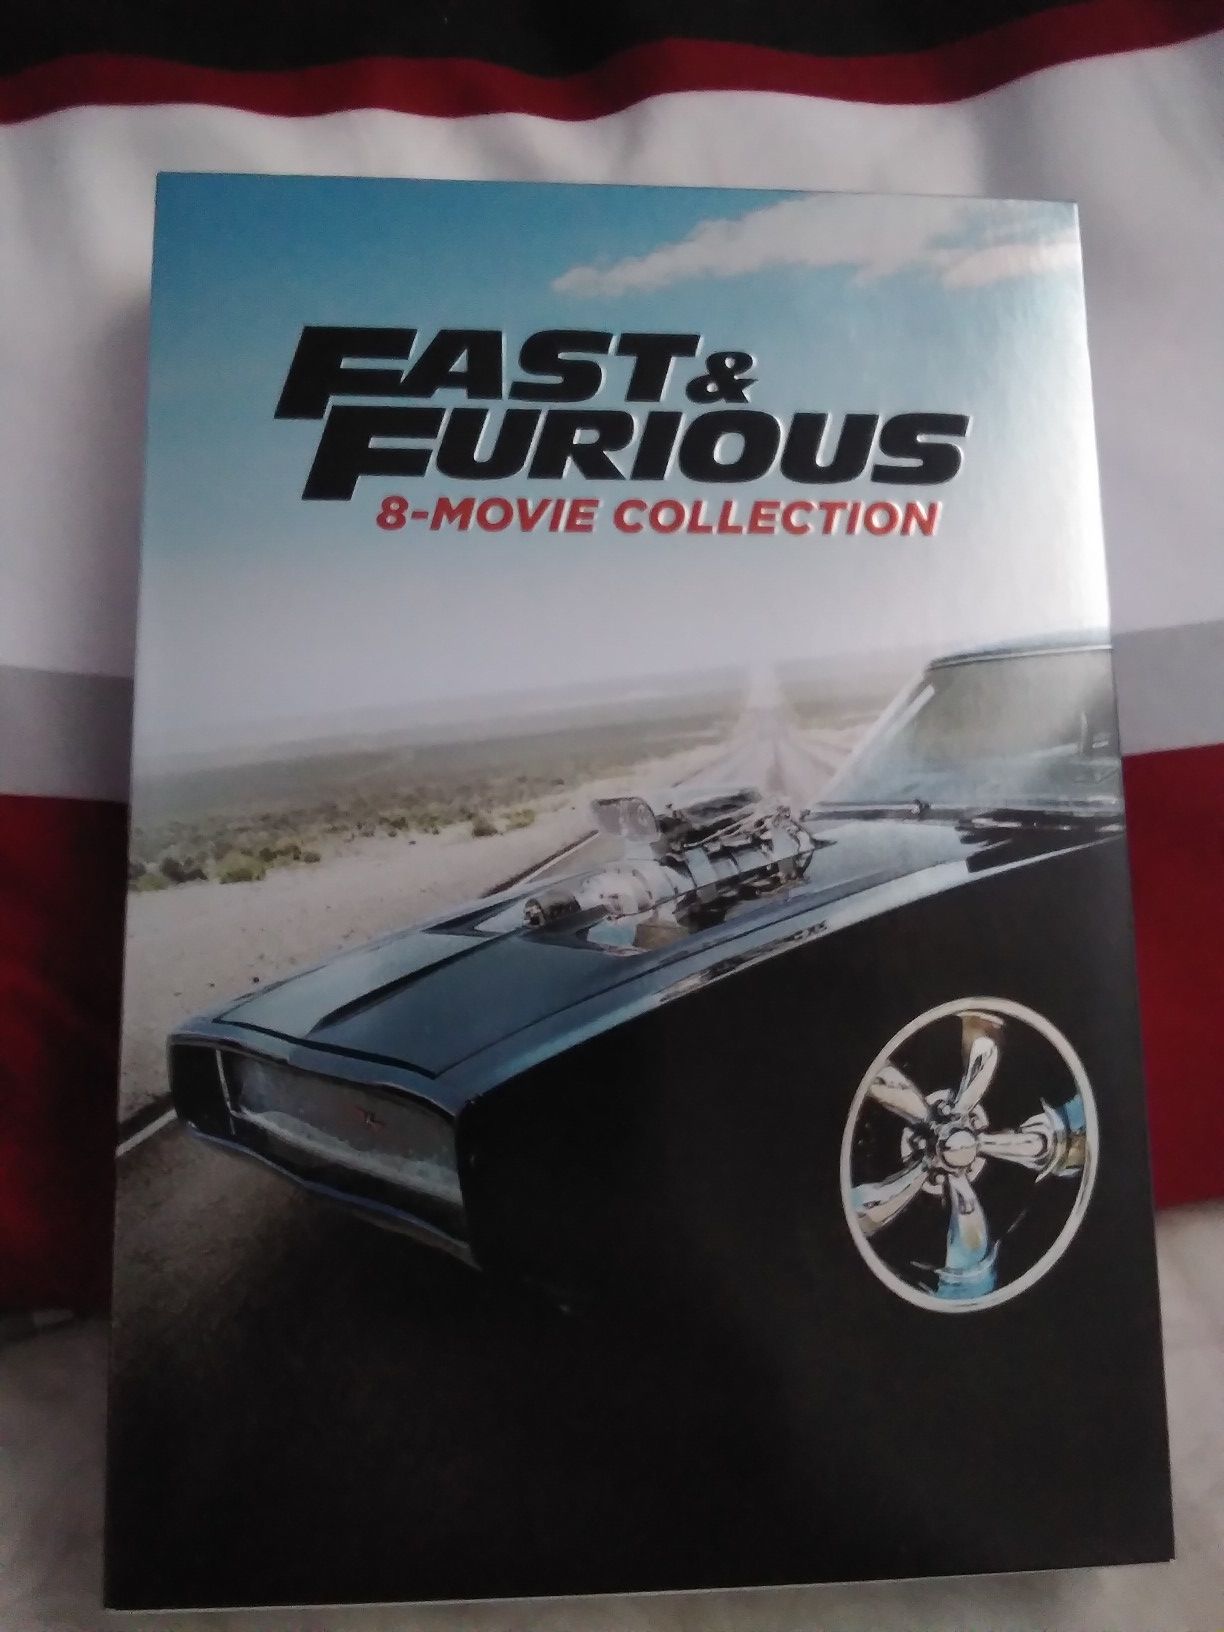 FAST & FURIOUS 8-MOVIE COLLECTION